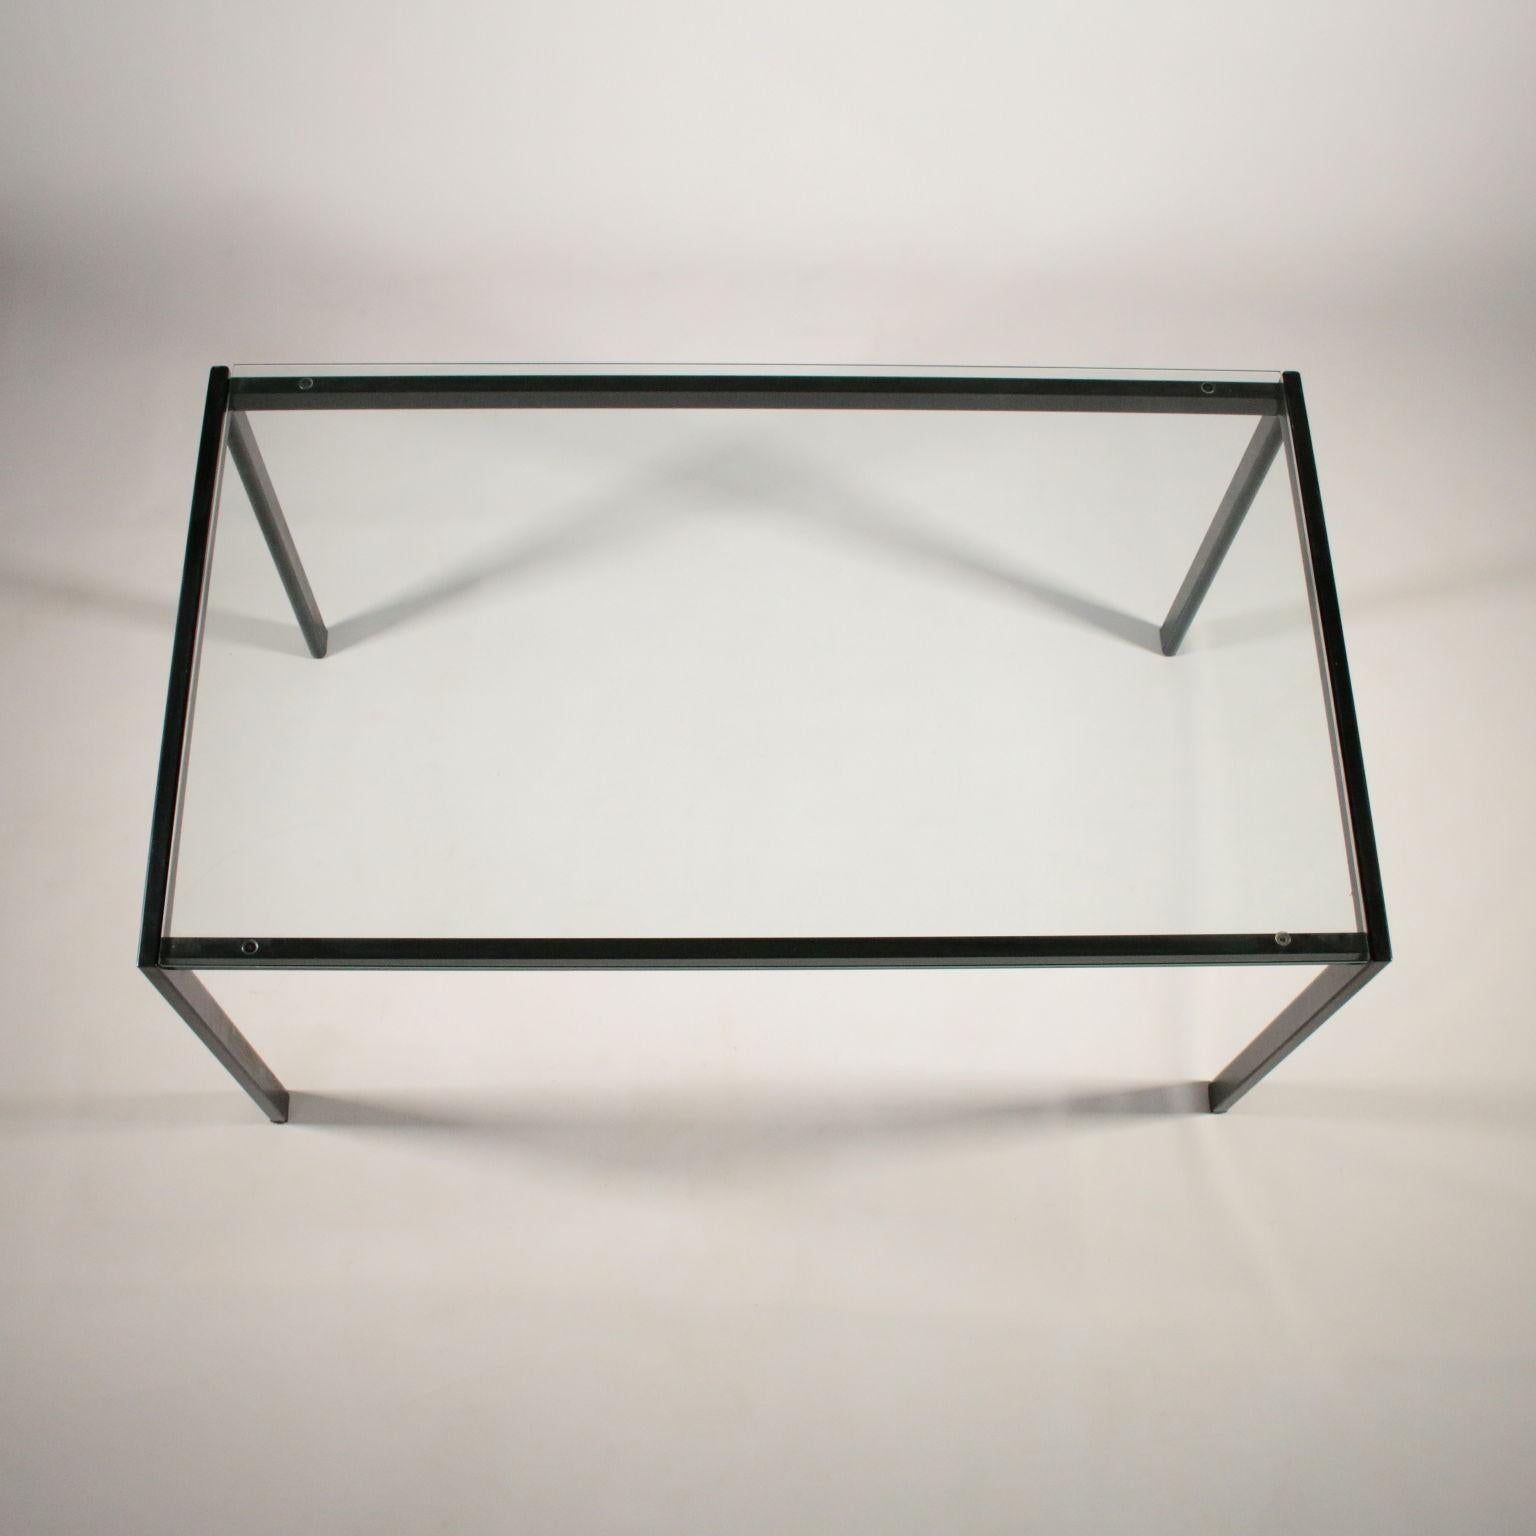 Metal Table by Gae Aulenti for Zanotta Glass Vintage Italy, 1980s-1990s